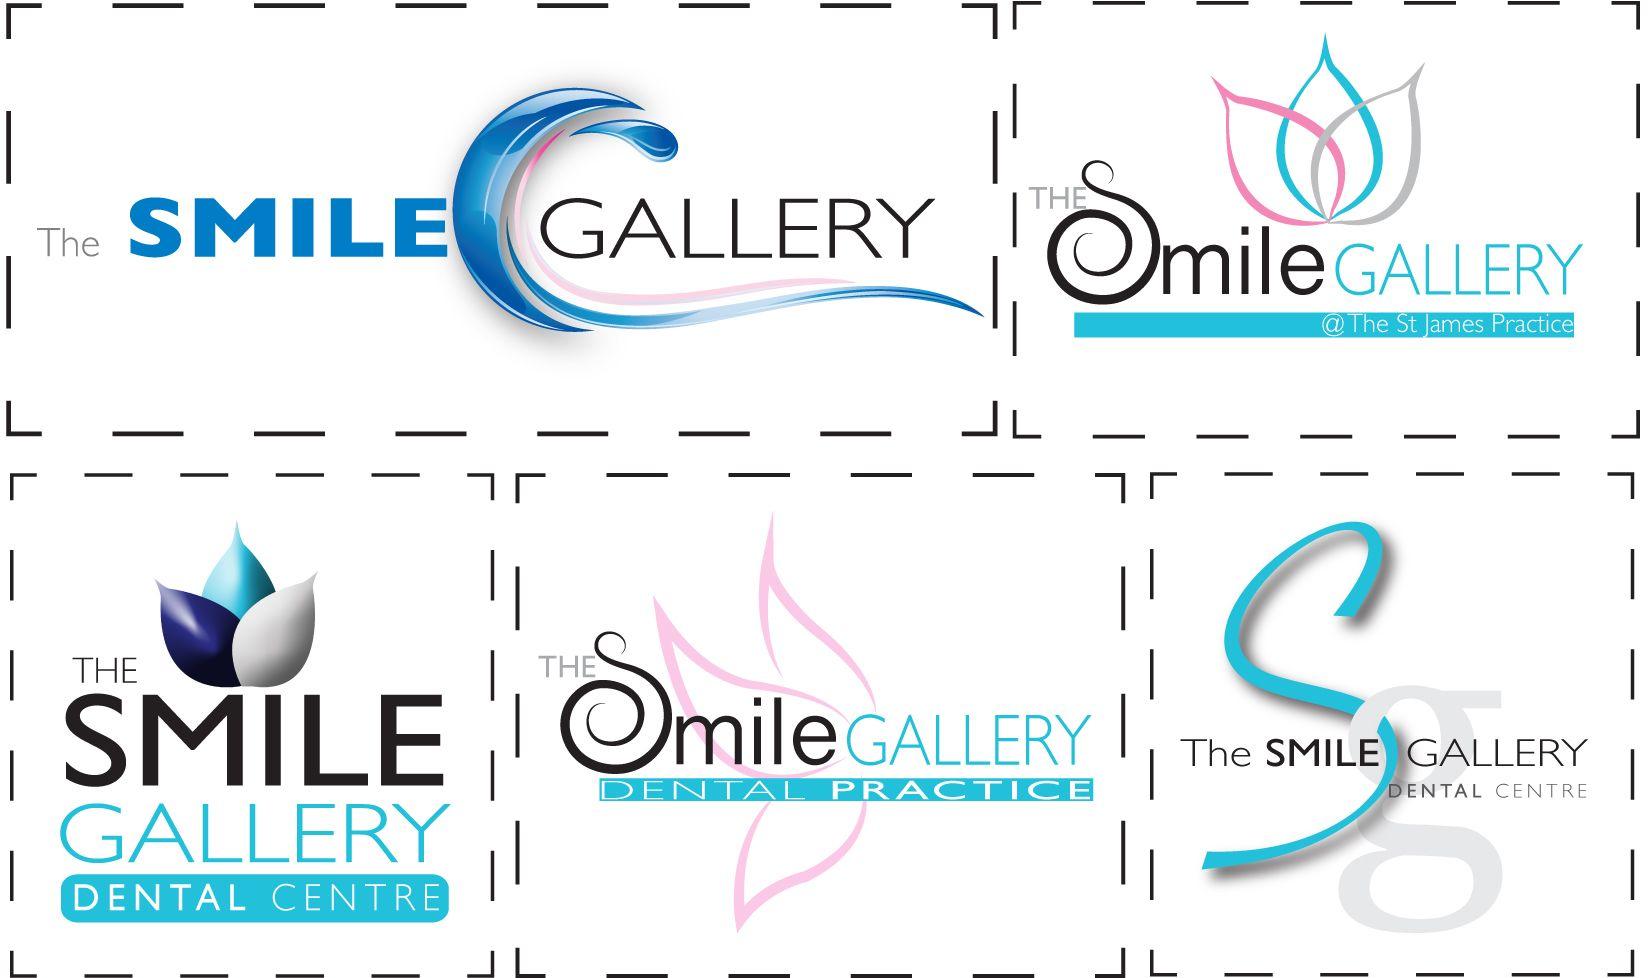 Lily Name Logo - Local dental practice logo design and signage ideas - Cydney Lily